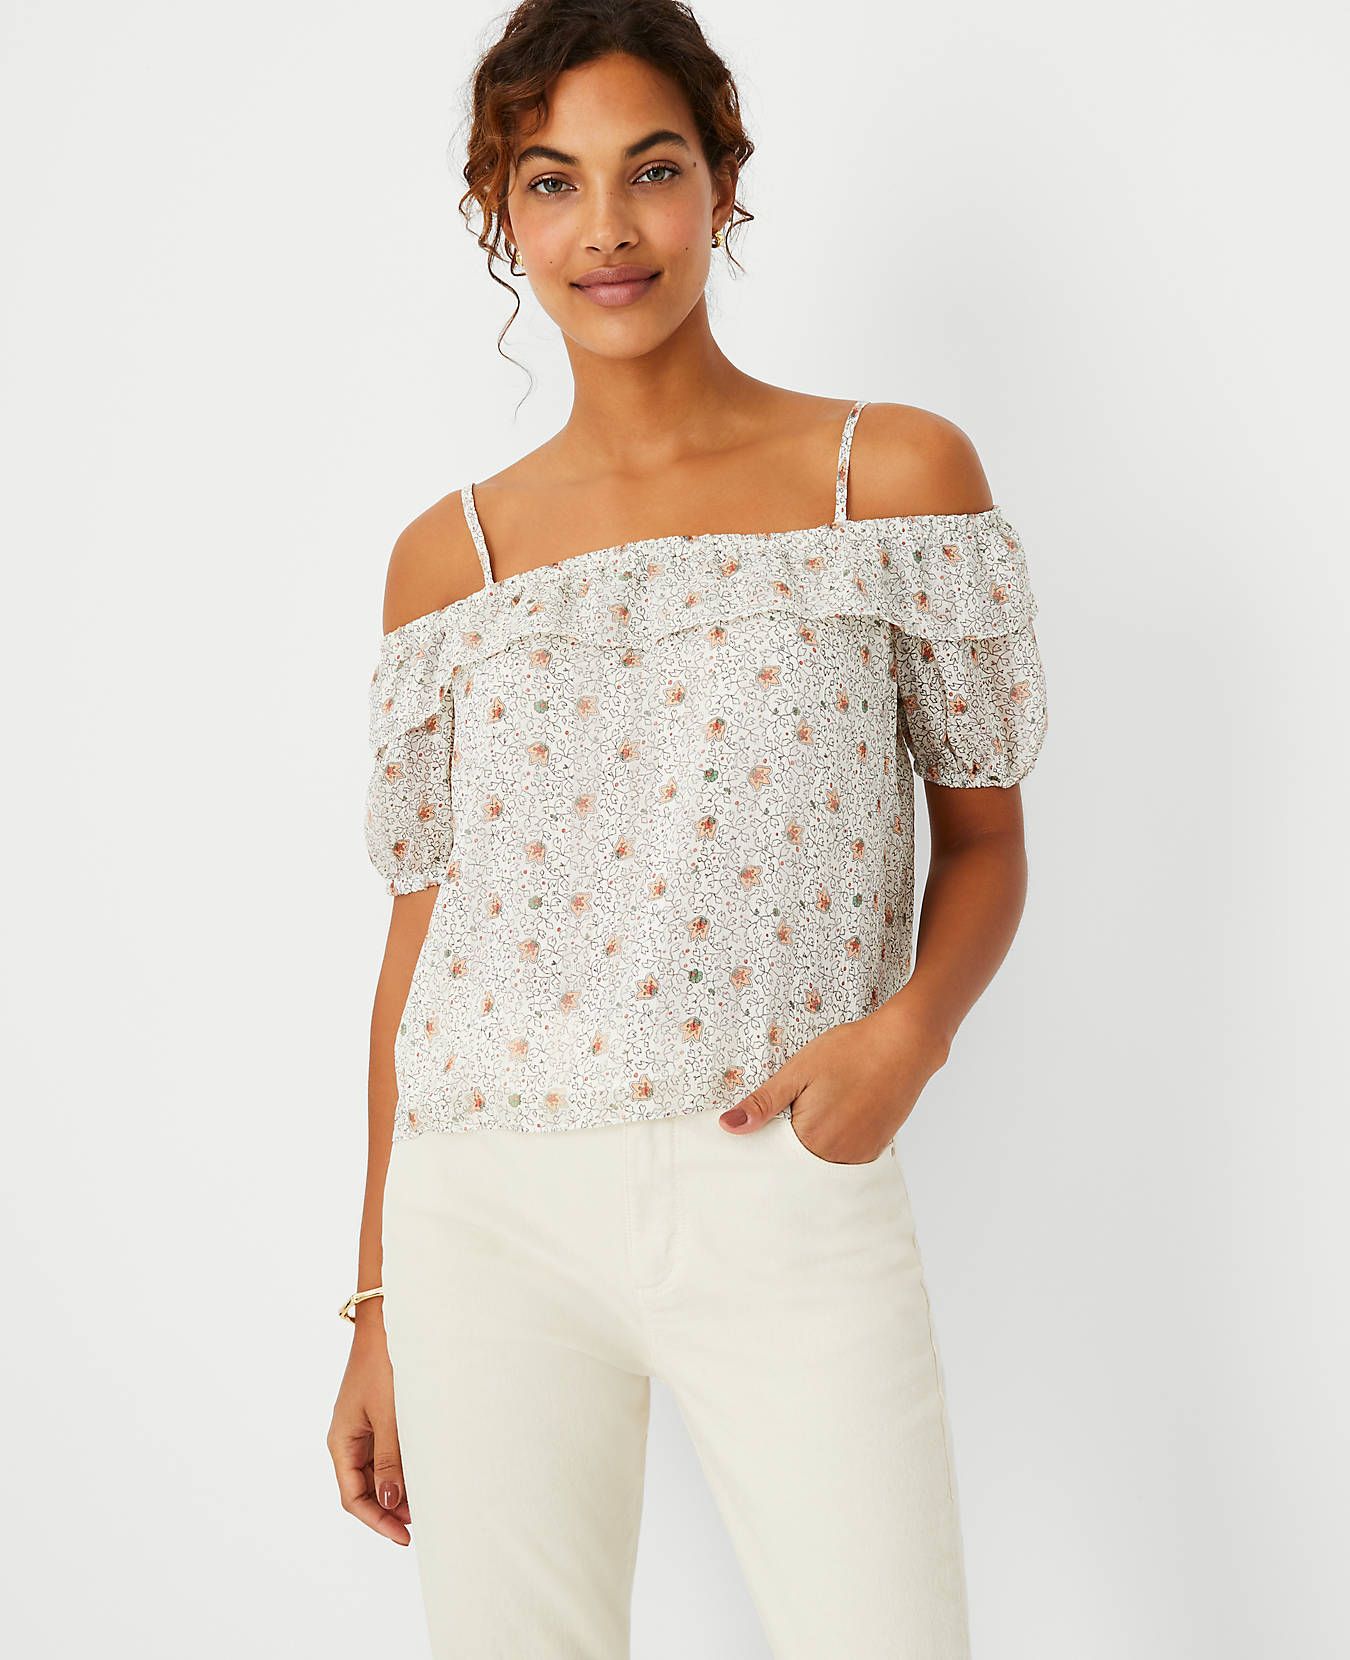 My Favorite Cute Summer Tops for Women (all from !)